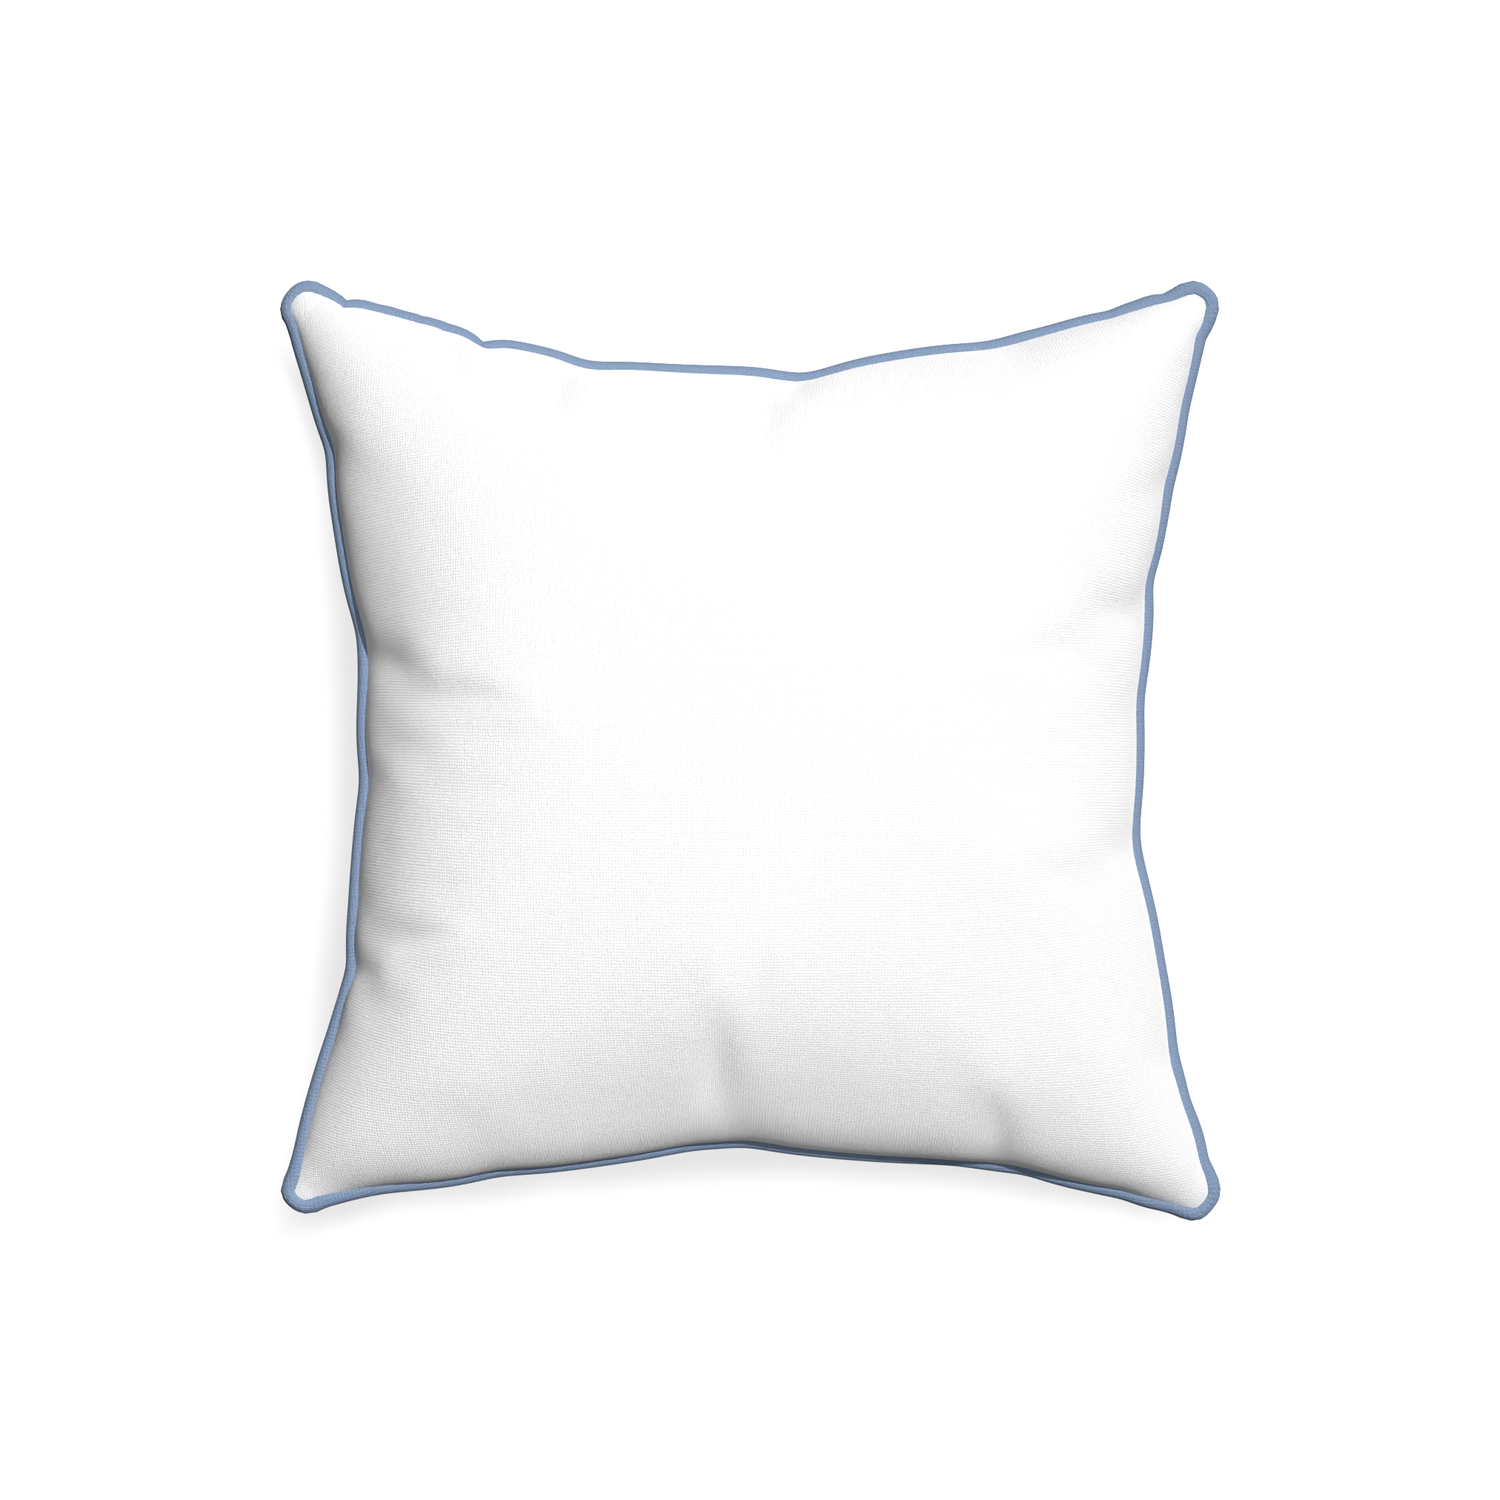 20-square snow custom pillow with sky piping on white background